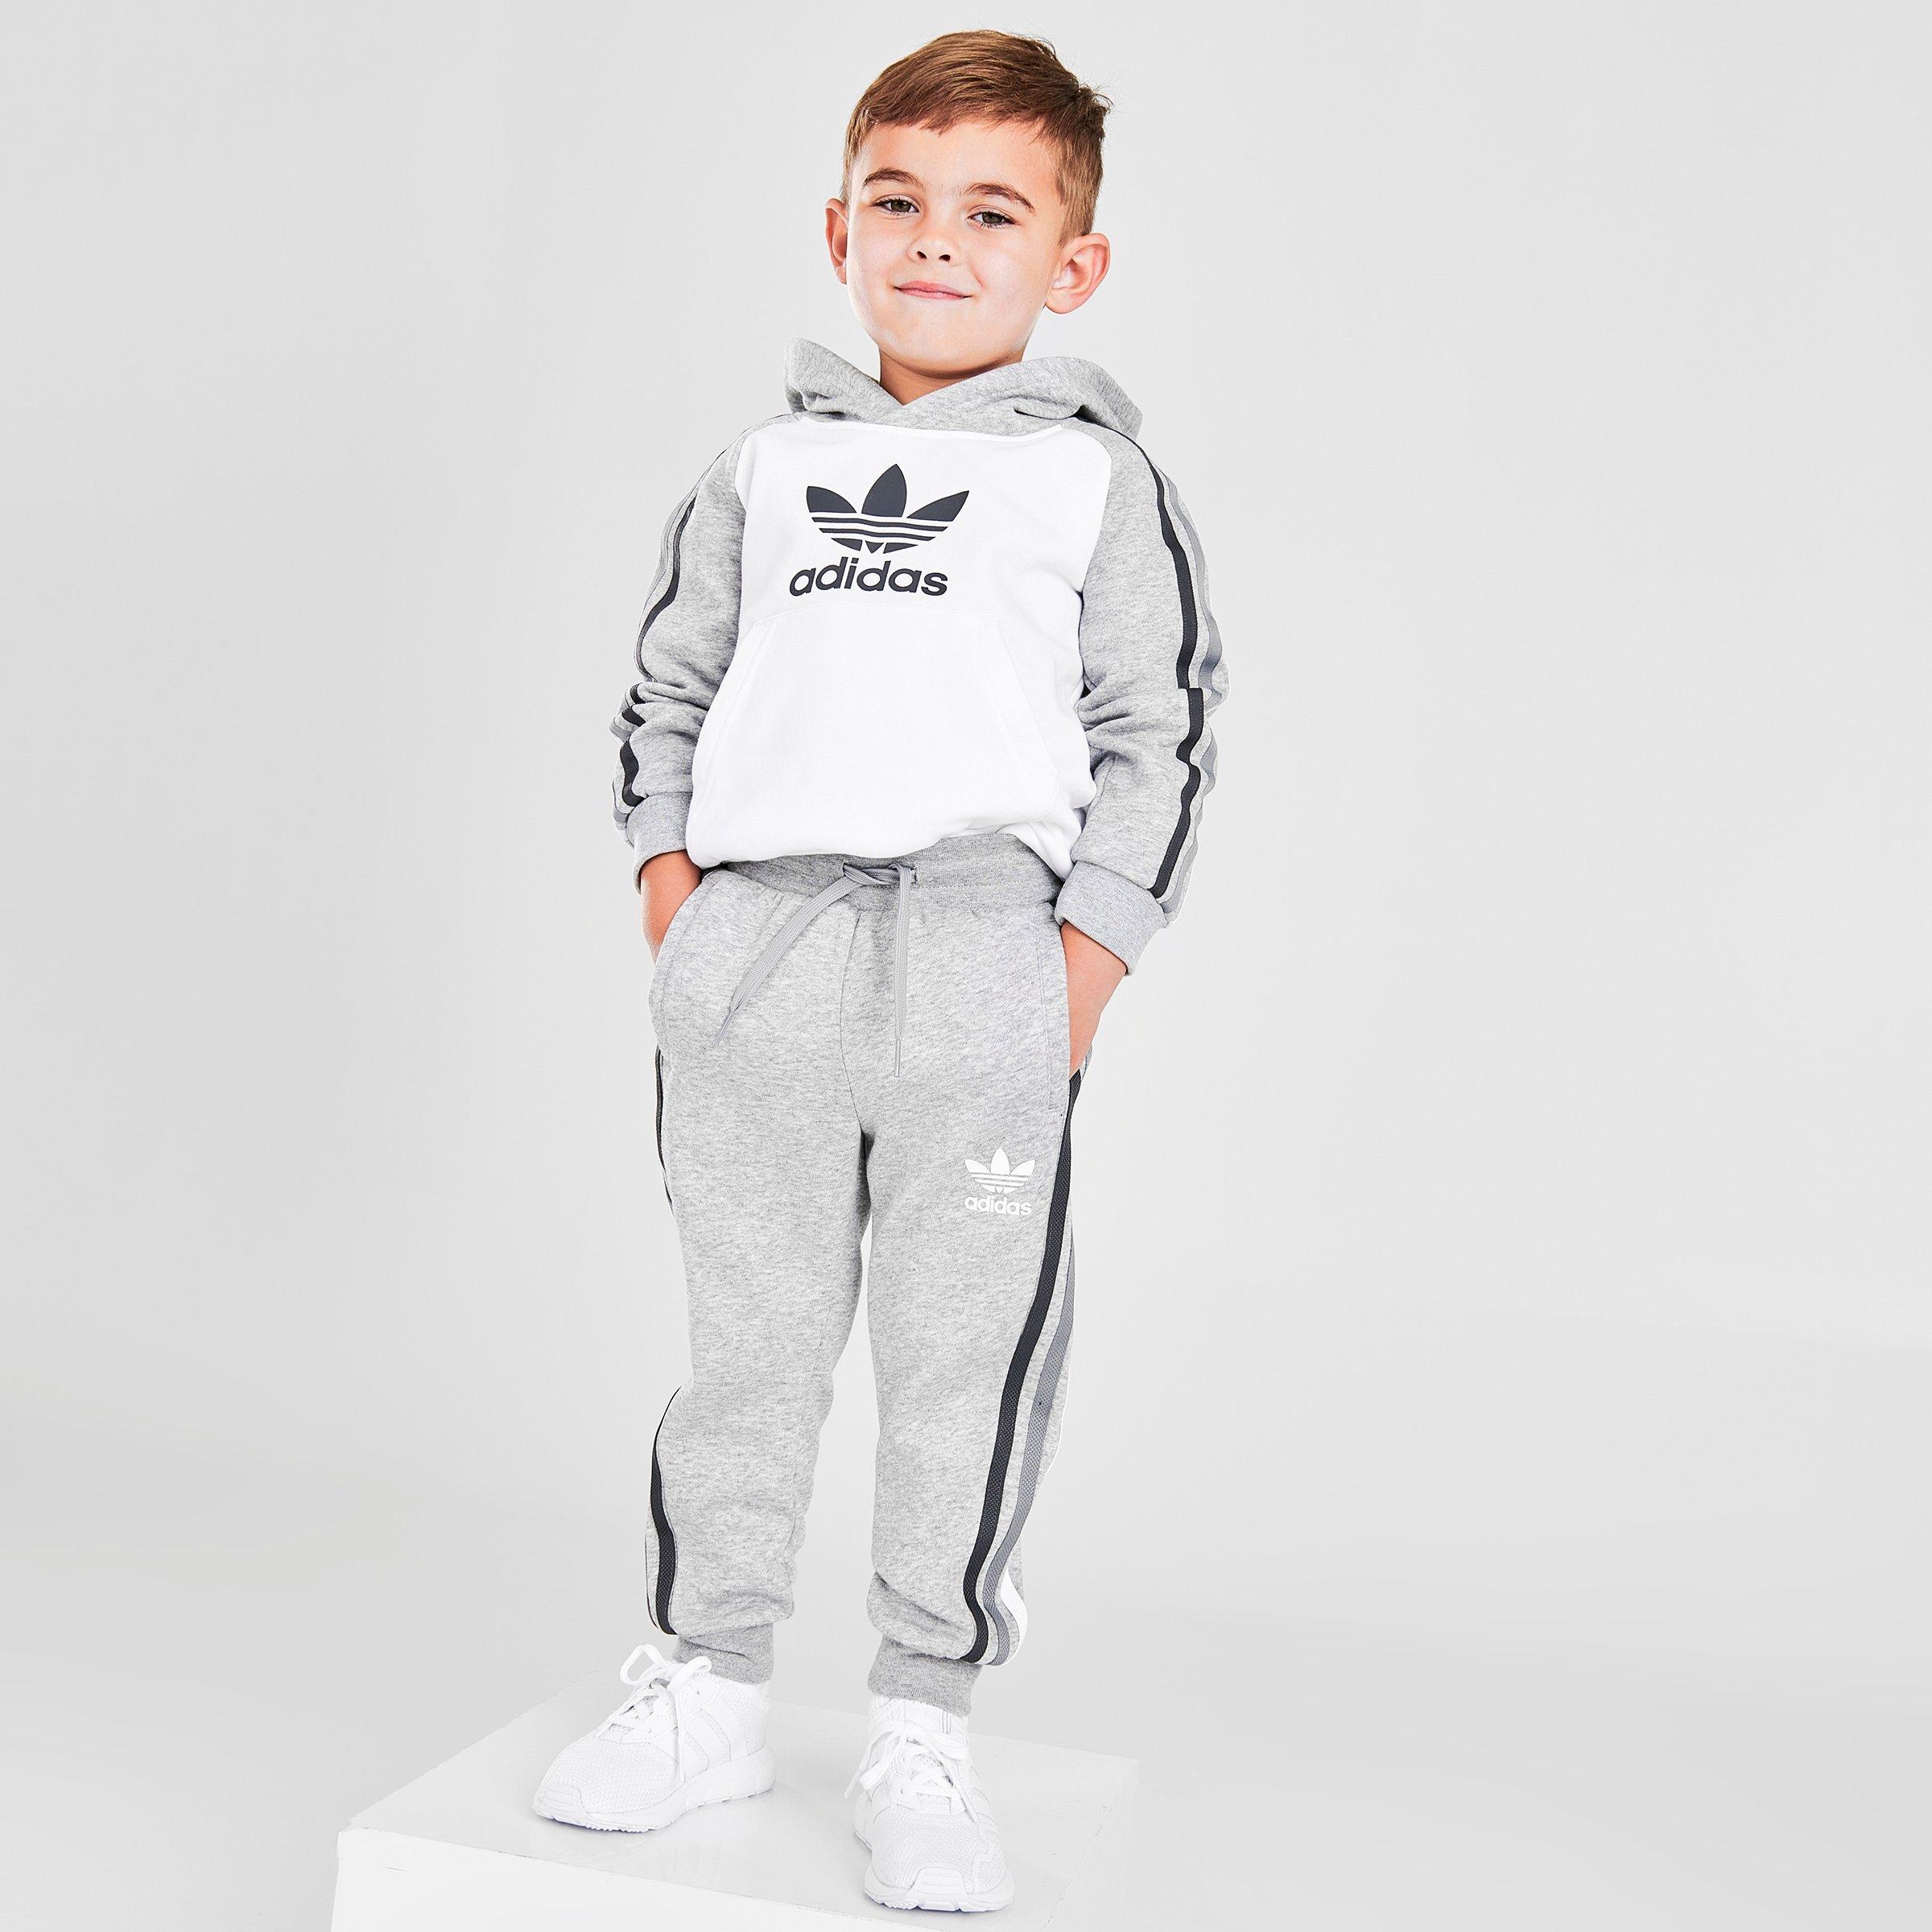 Boys' Toddler and Little Kids' adidas 3 